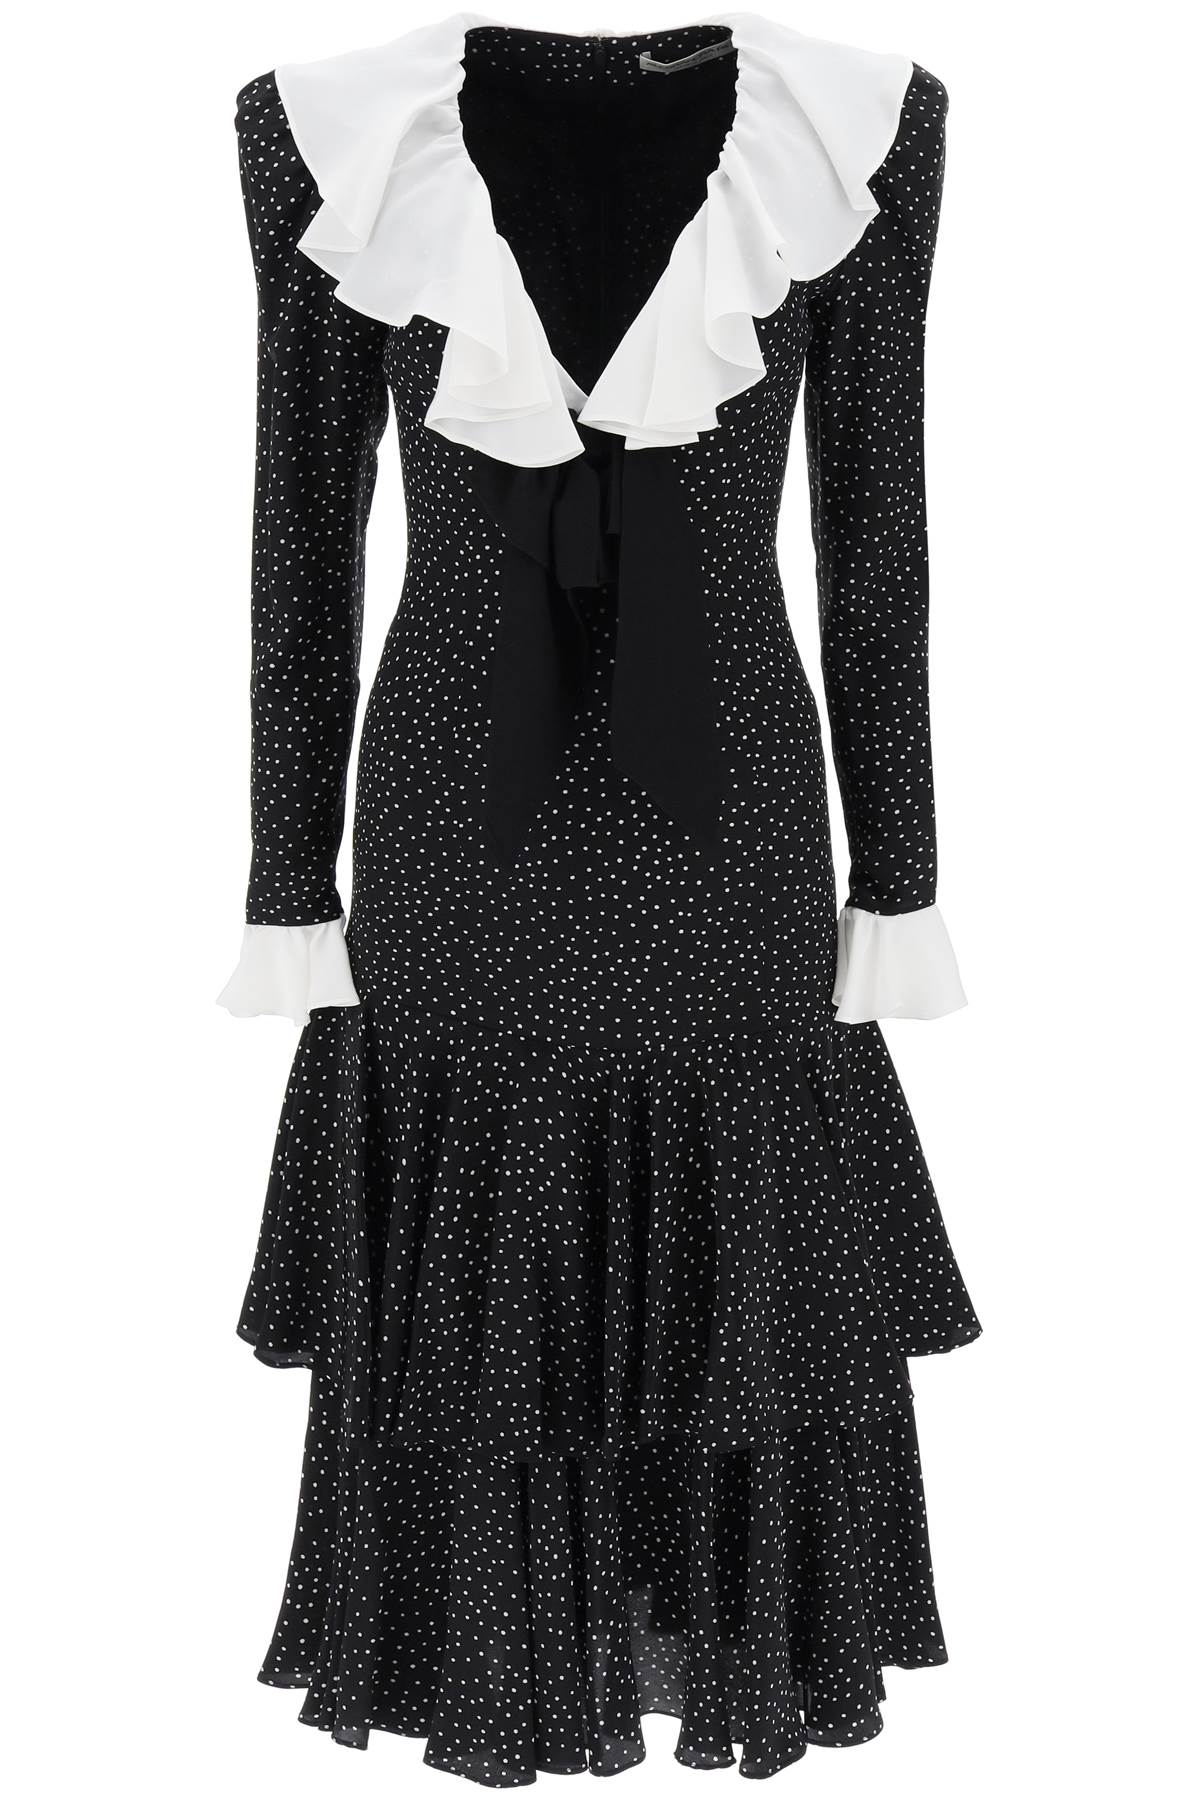 ALESSANDRA RICH POLKA-DOT DRESS WITH CONTRASTING DETAILING